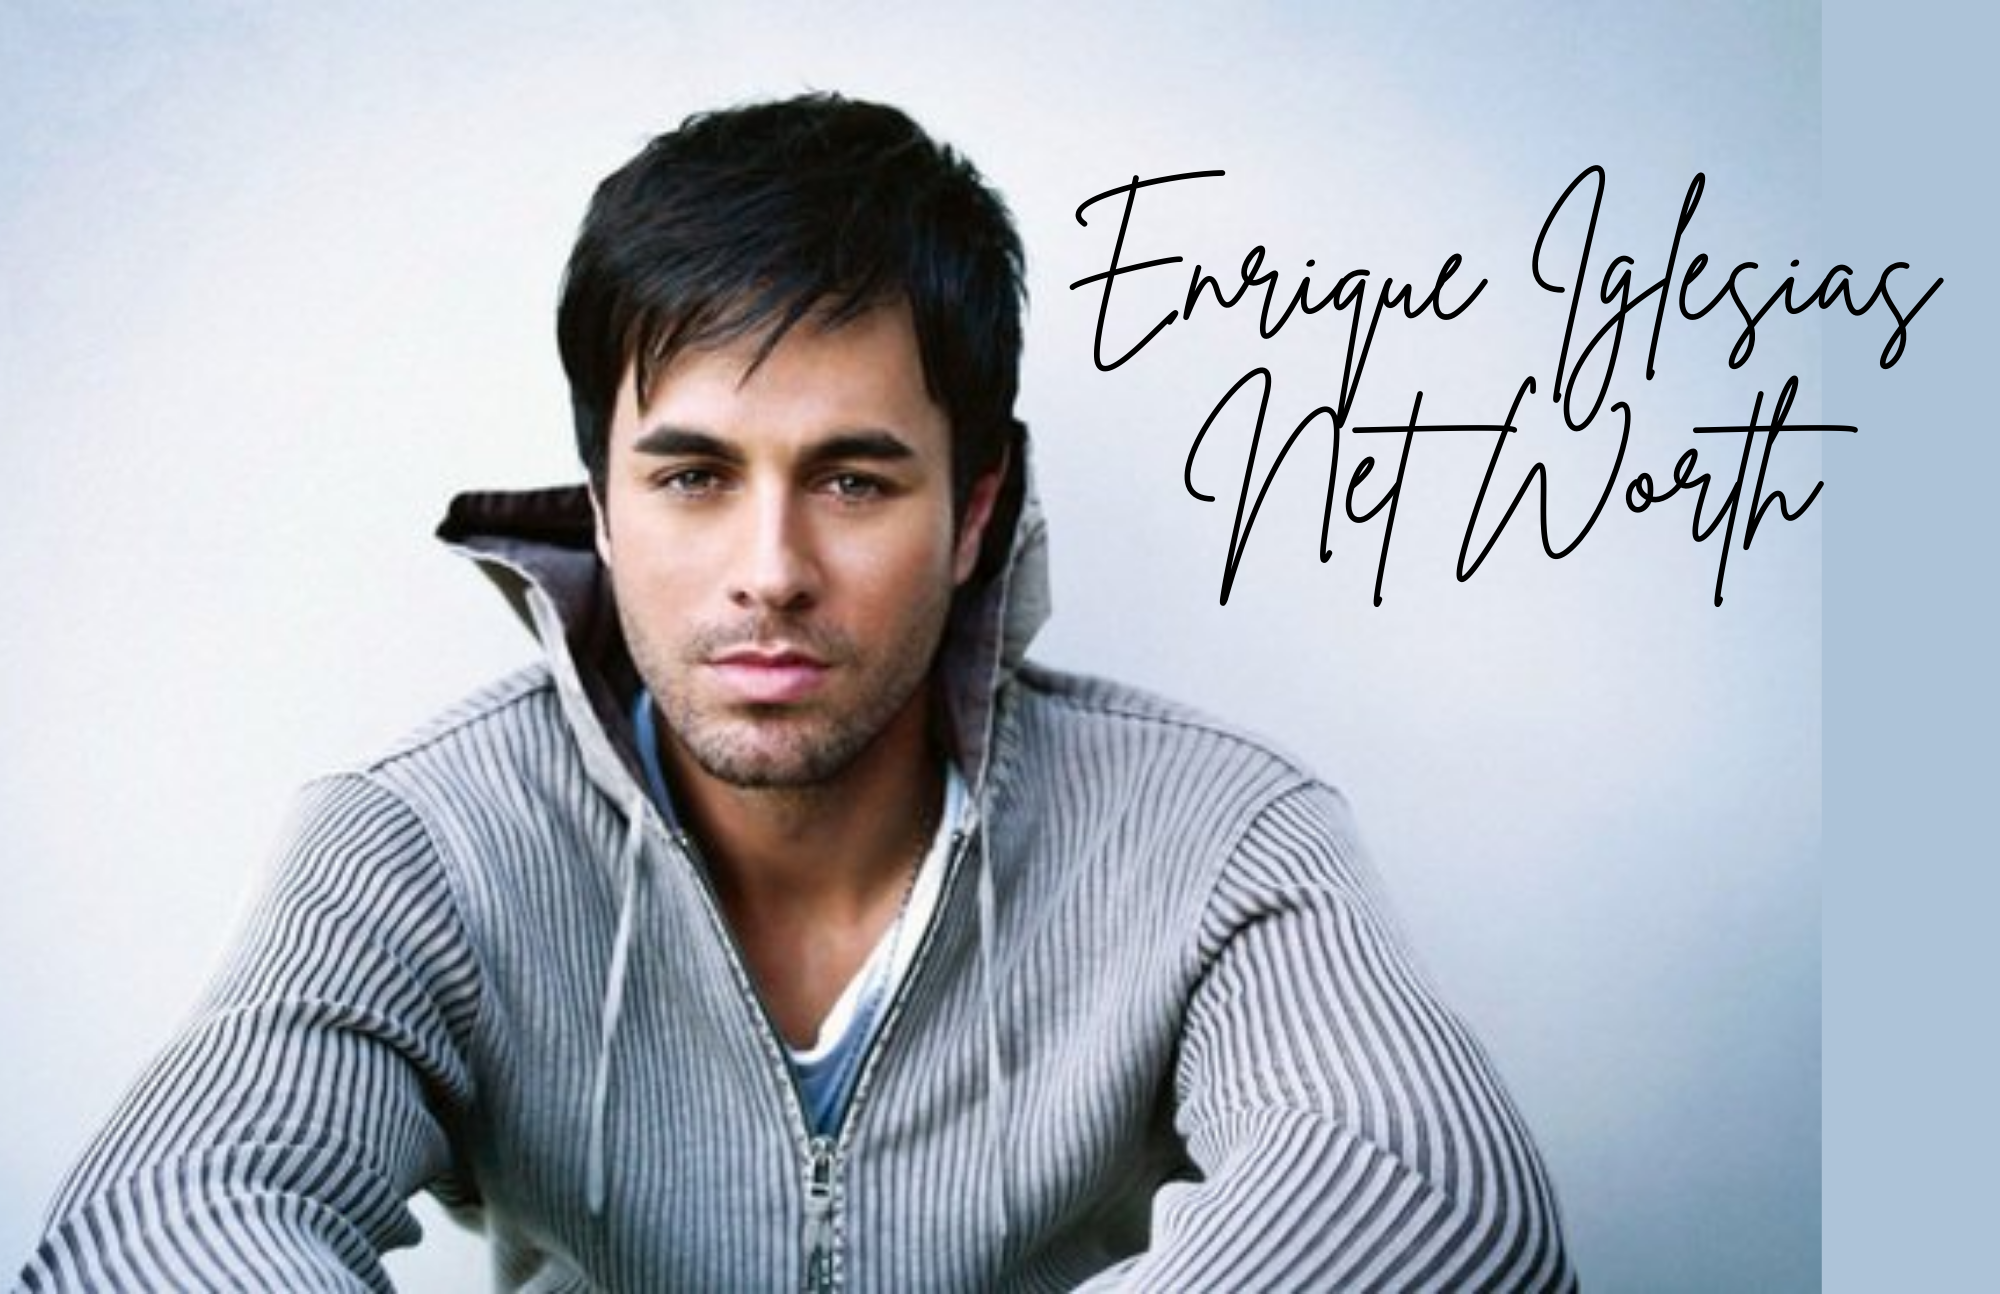 Enrique Iglesias Net Worth - How Does His Wealth Rank Globally, And What Is His Average Income?